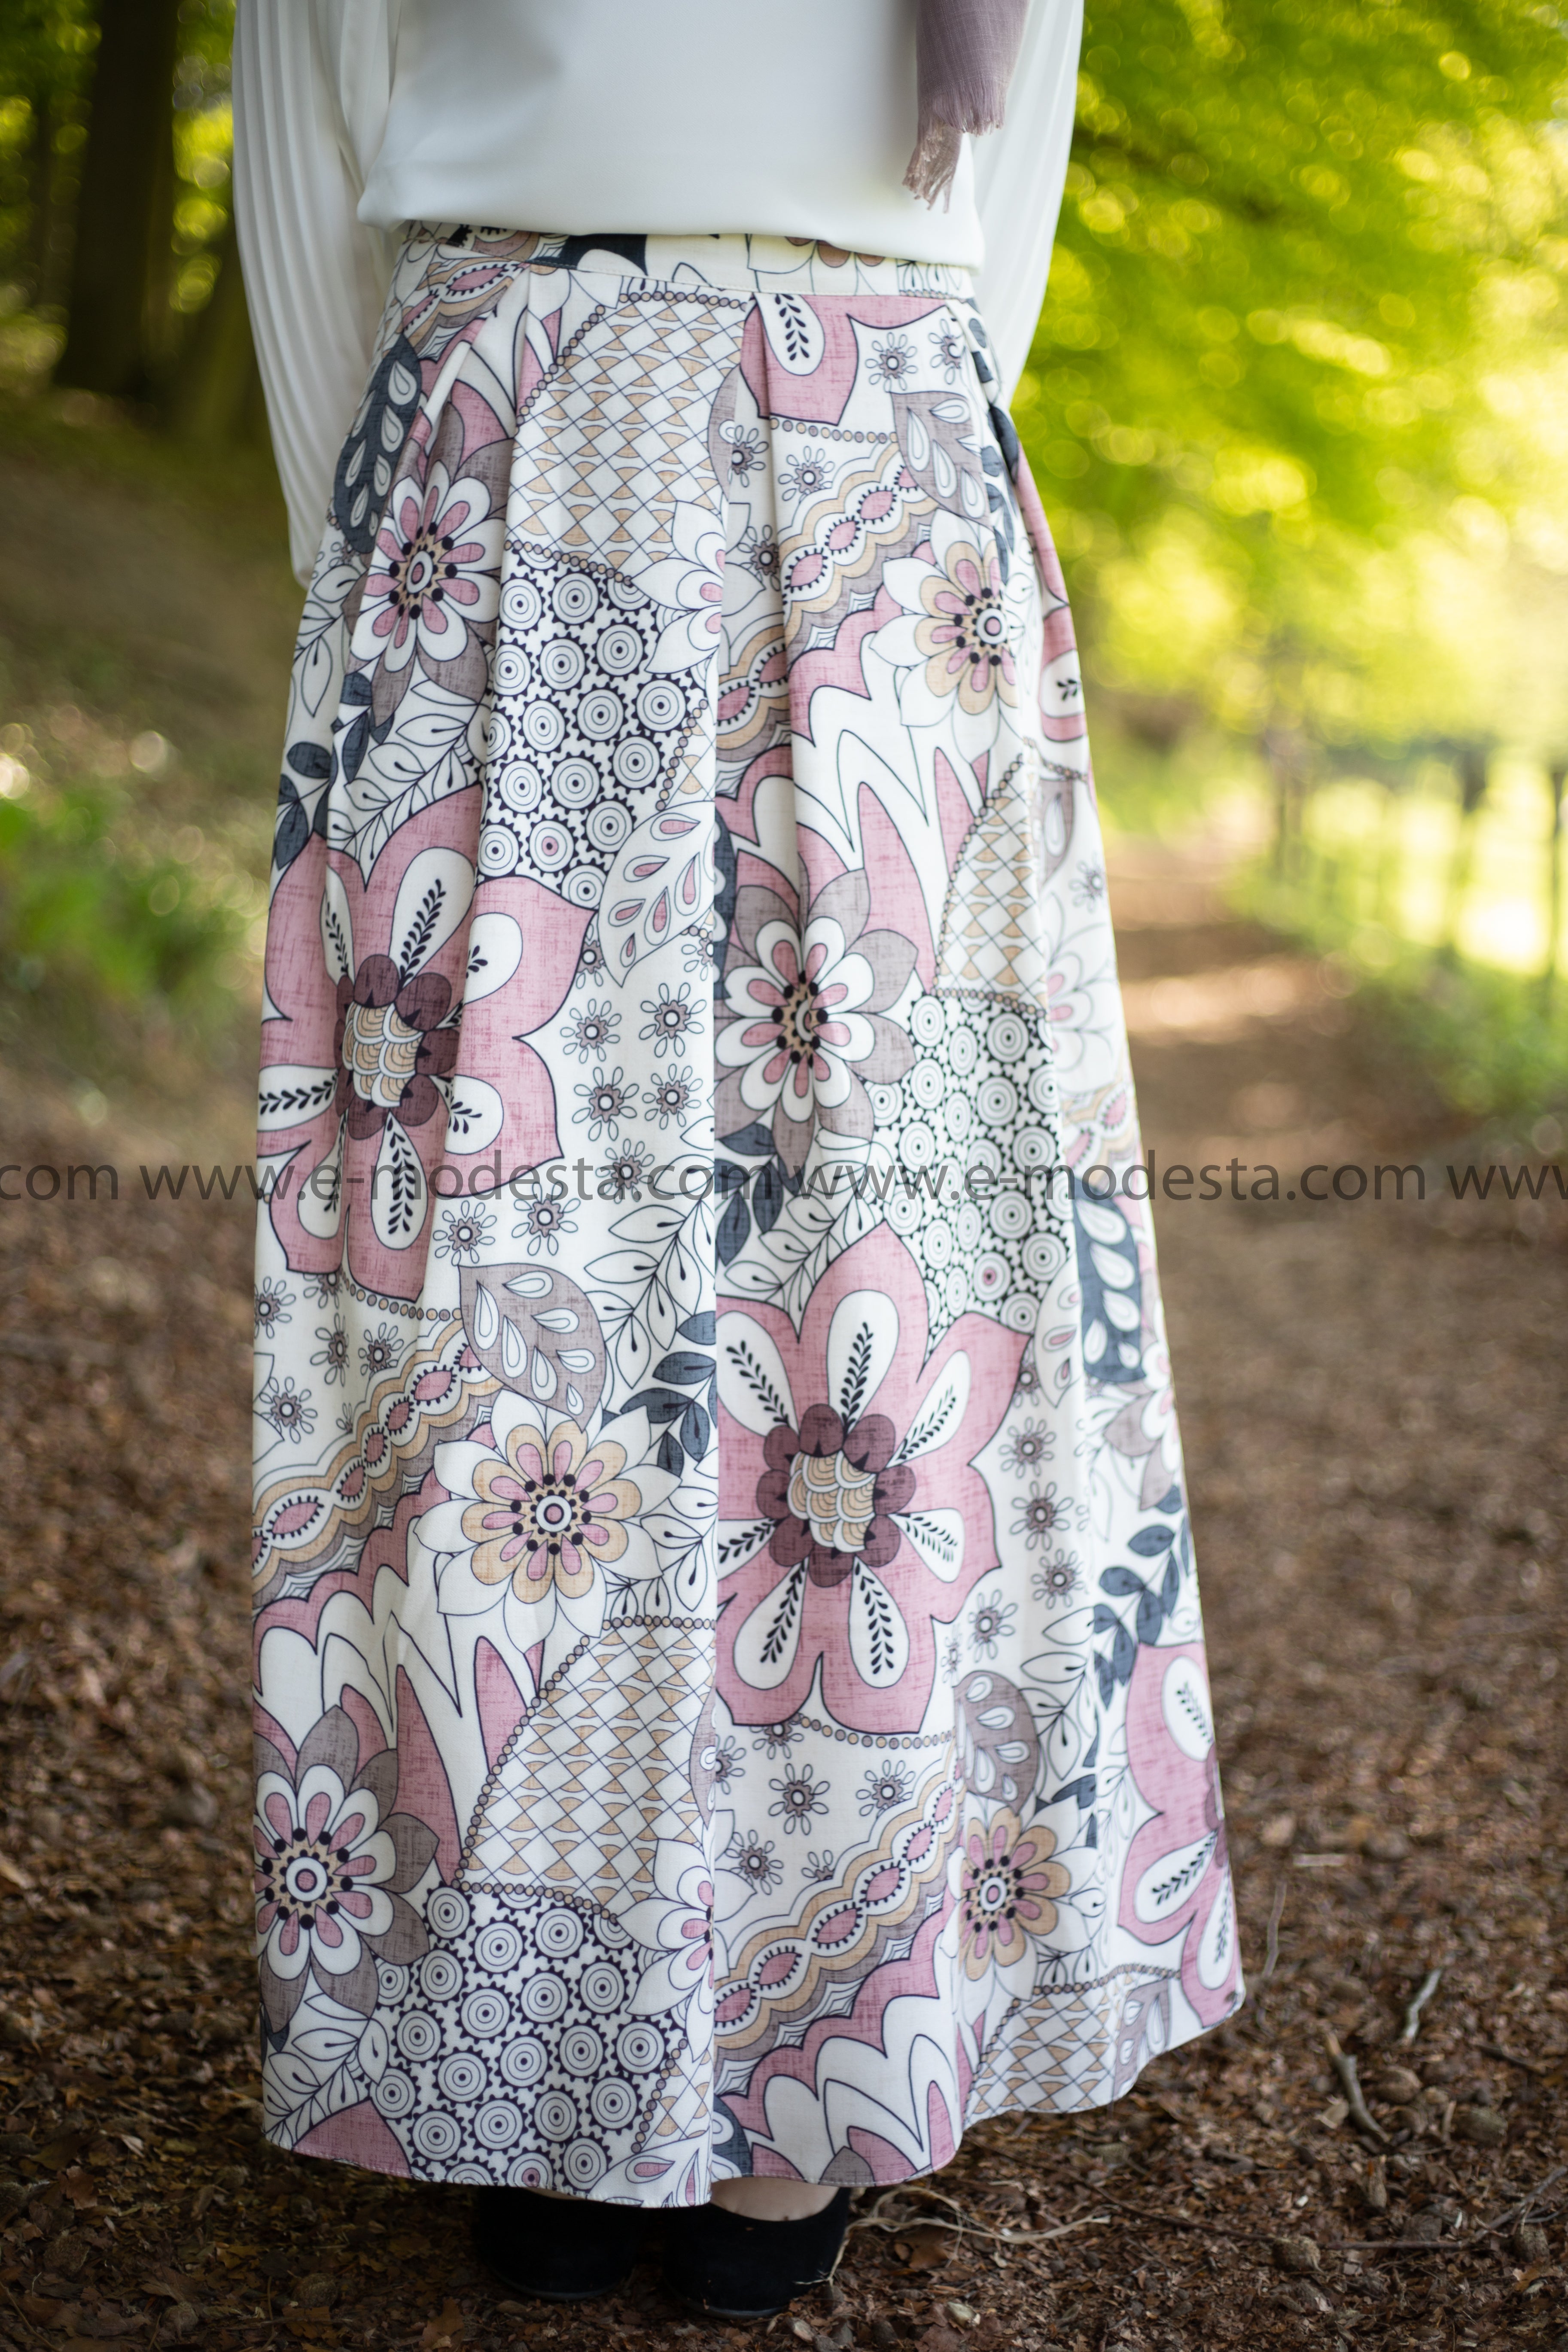 Maxi Floral Skirt | Pink & Purple | Lined from Inside - E-Modesta